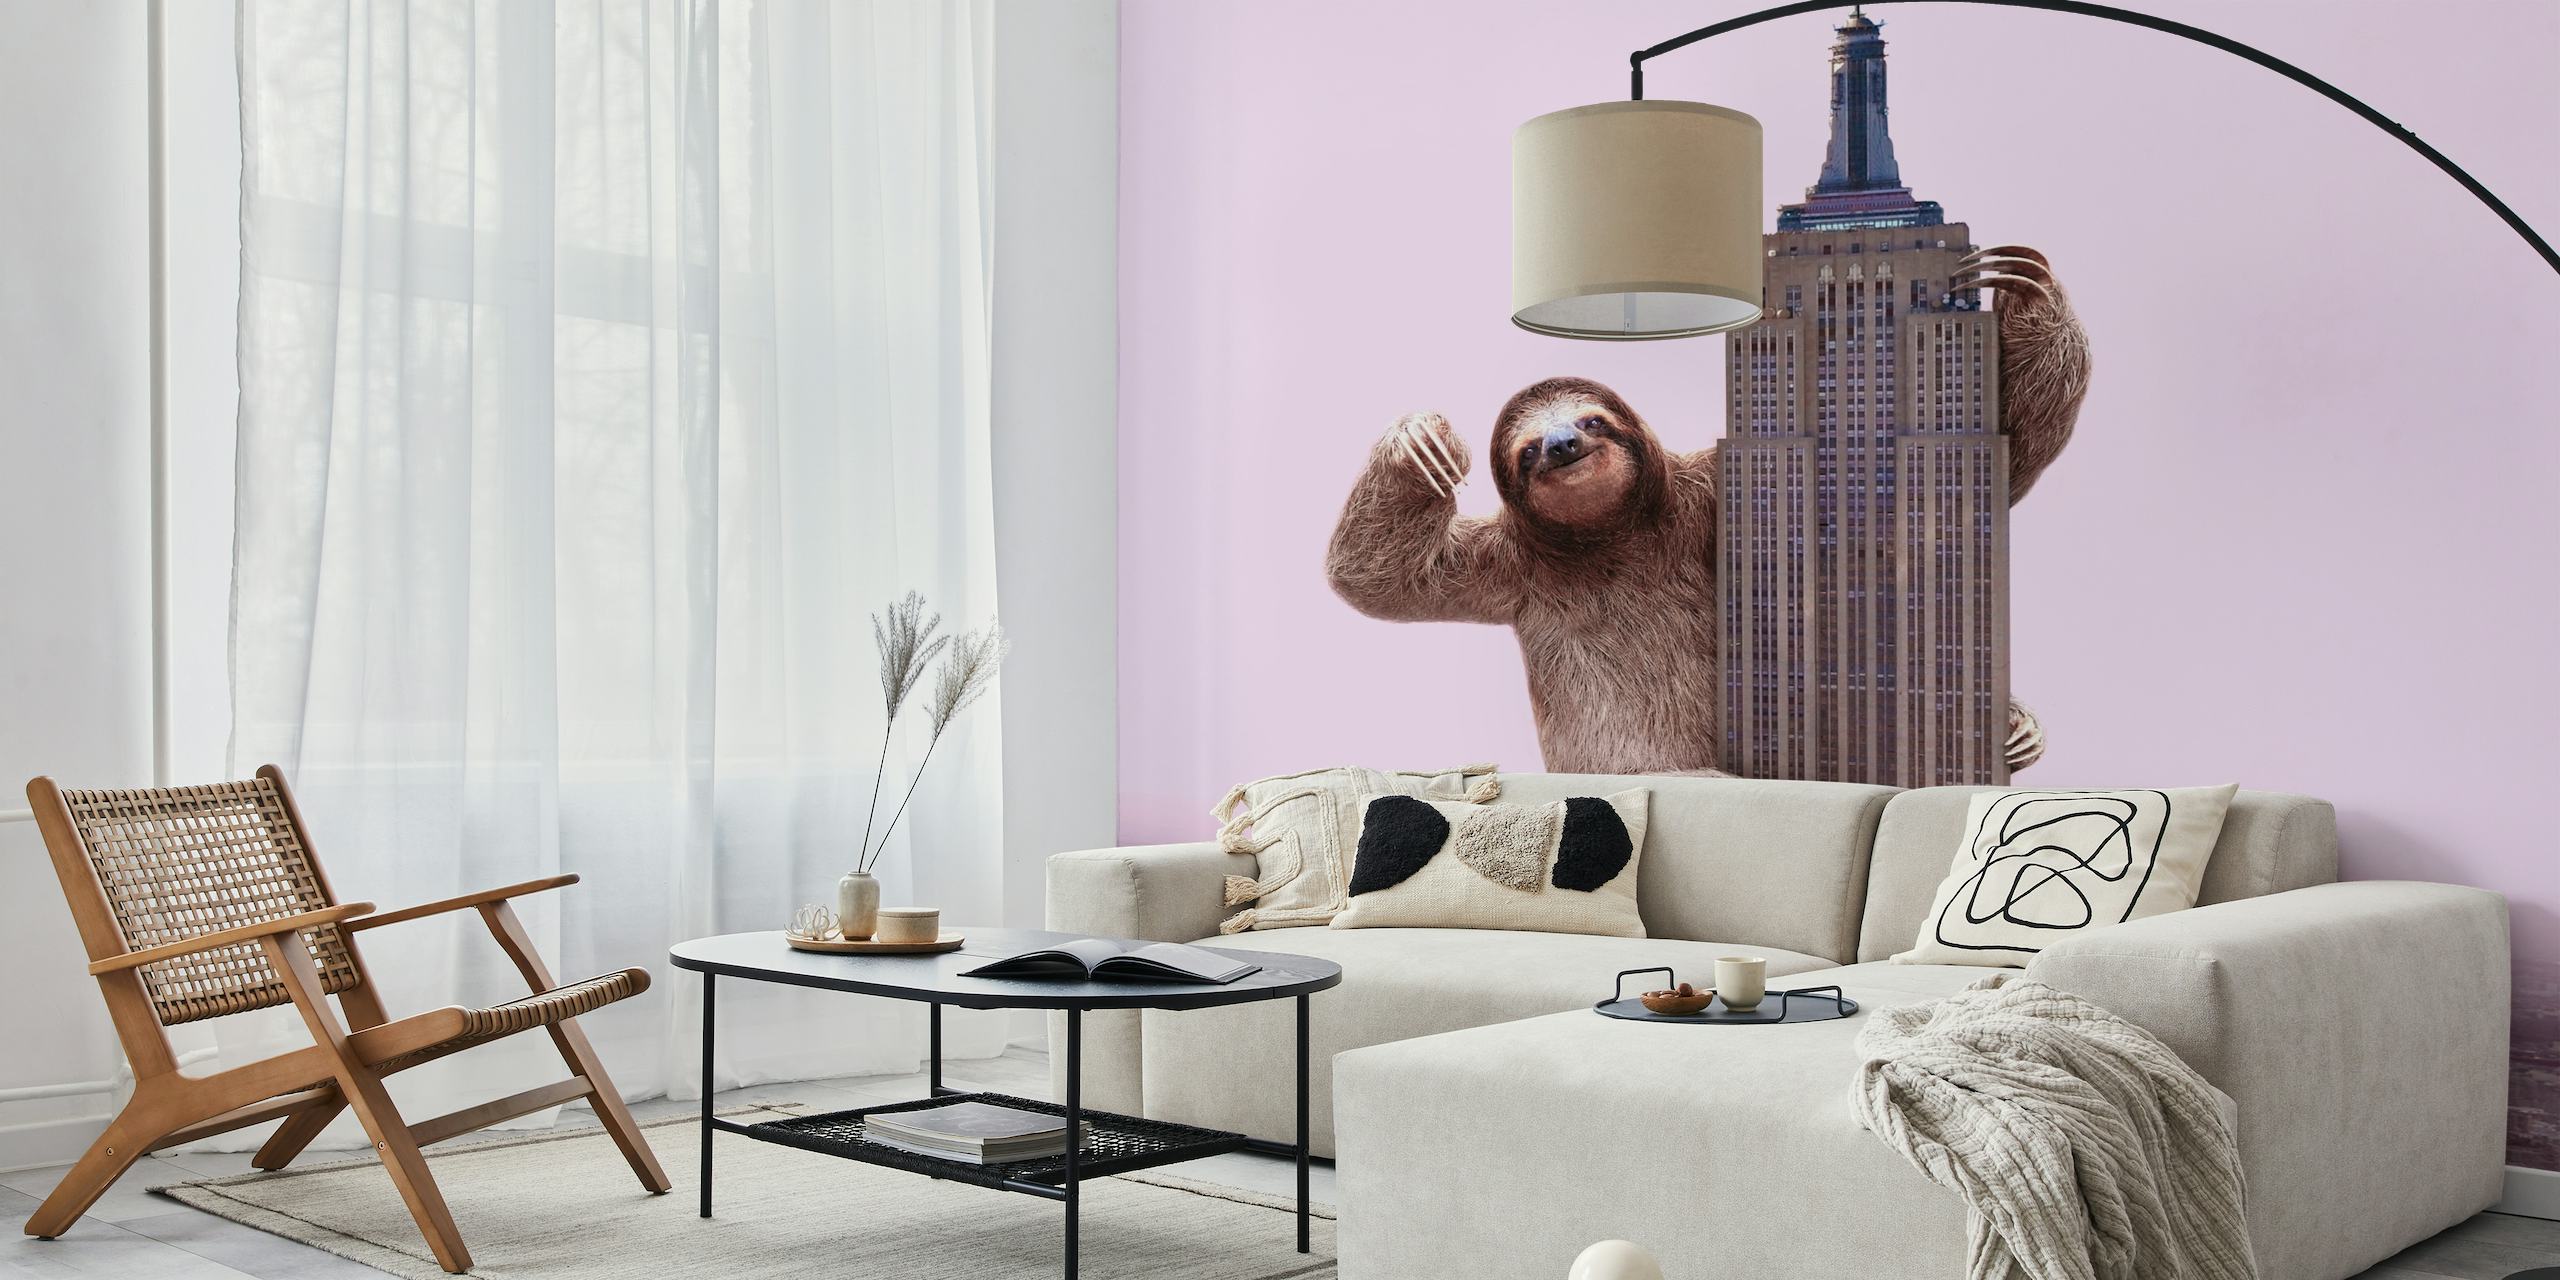 King Sloth wall mural with a sloth perched on a skyscraper